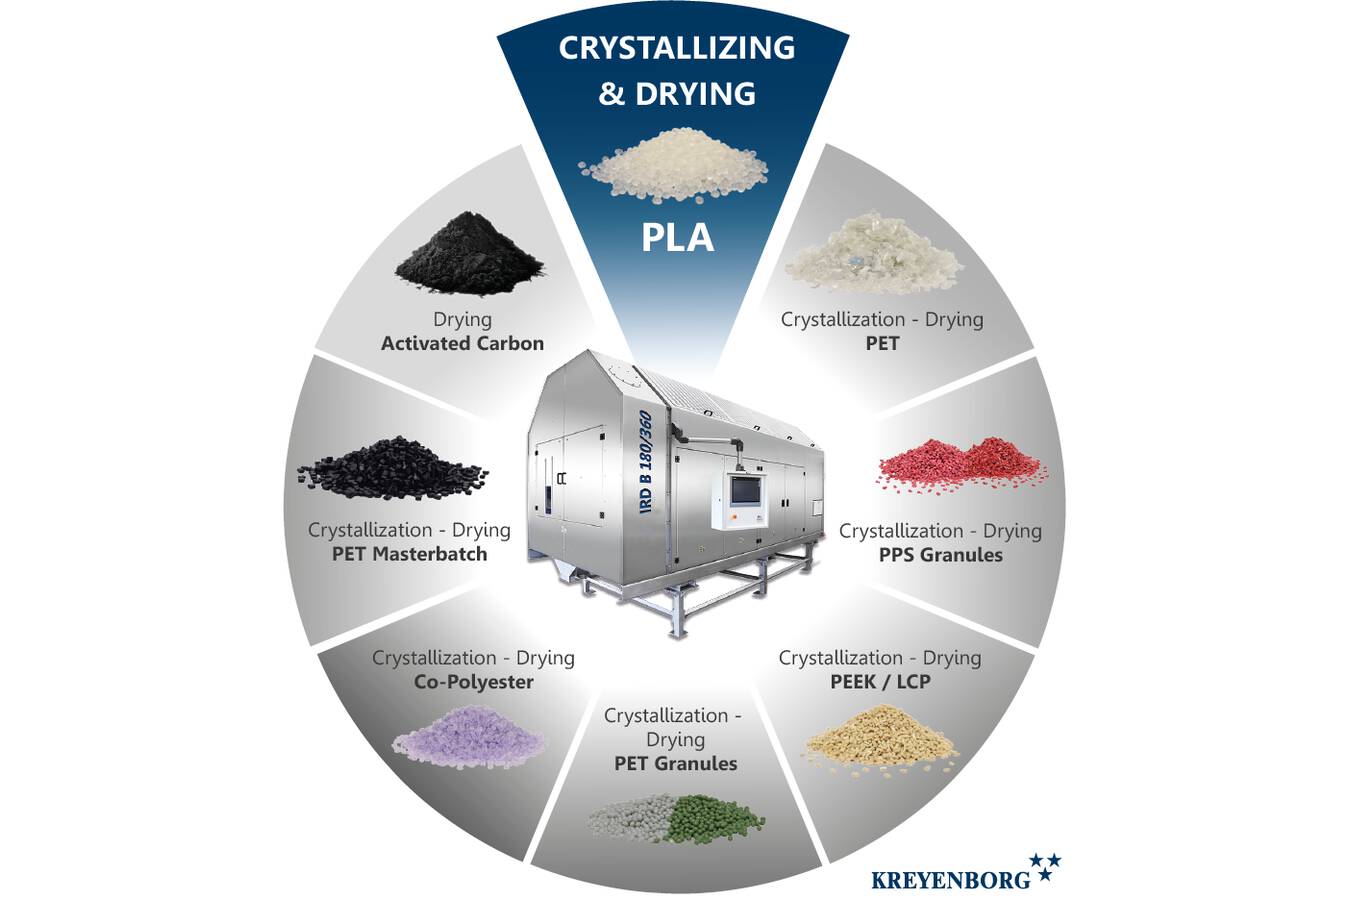 PLA crystallization and drying in minutes instead of hours  PLA continues to enjoy increasing popularity. A particular challenge in processing is crystallization and drying. With its infrared rotary drum (IRD), KREYENBORG offers a fast, energy-saving and product-friendly solution.